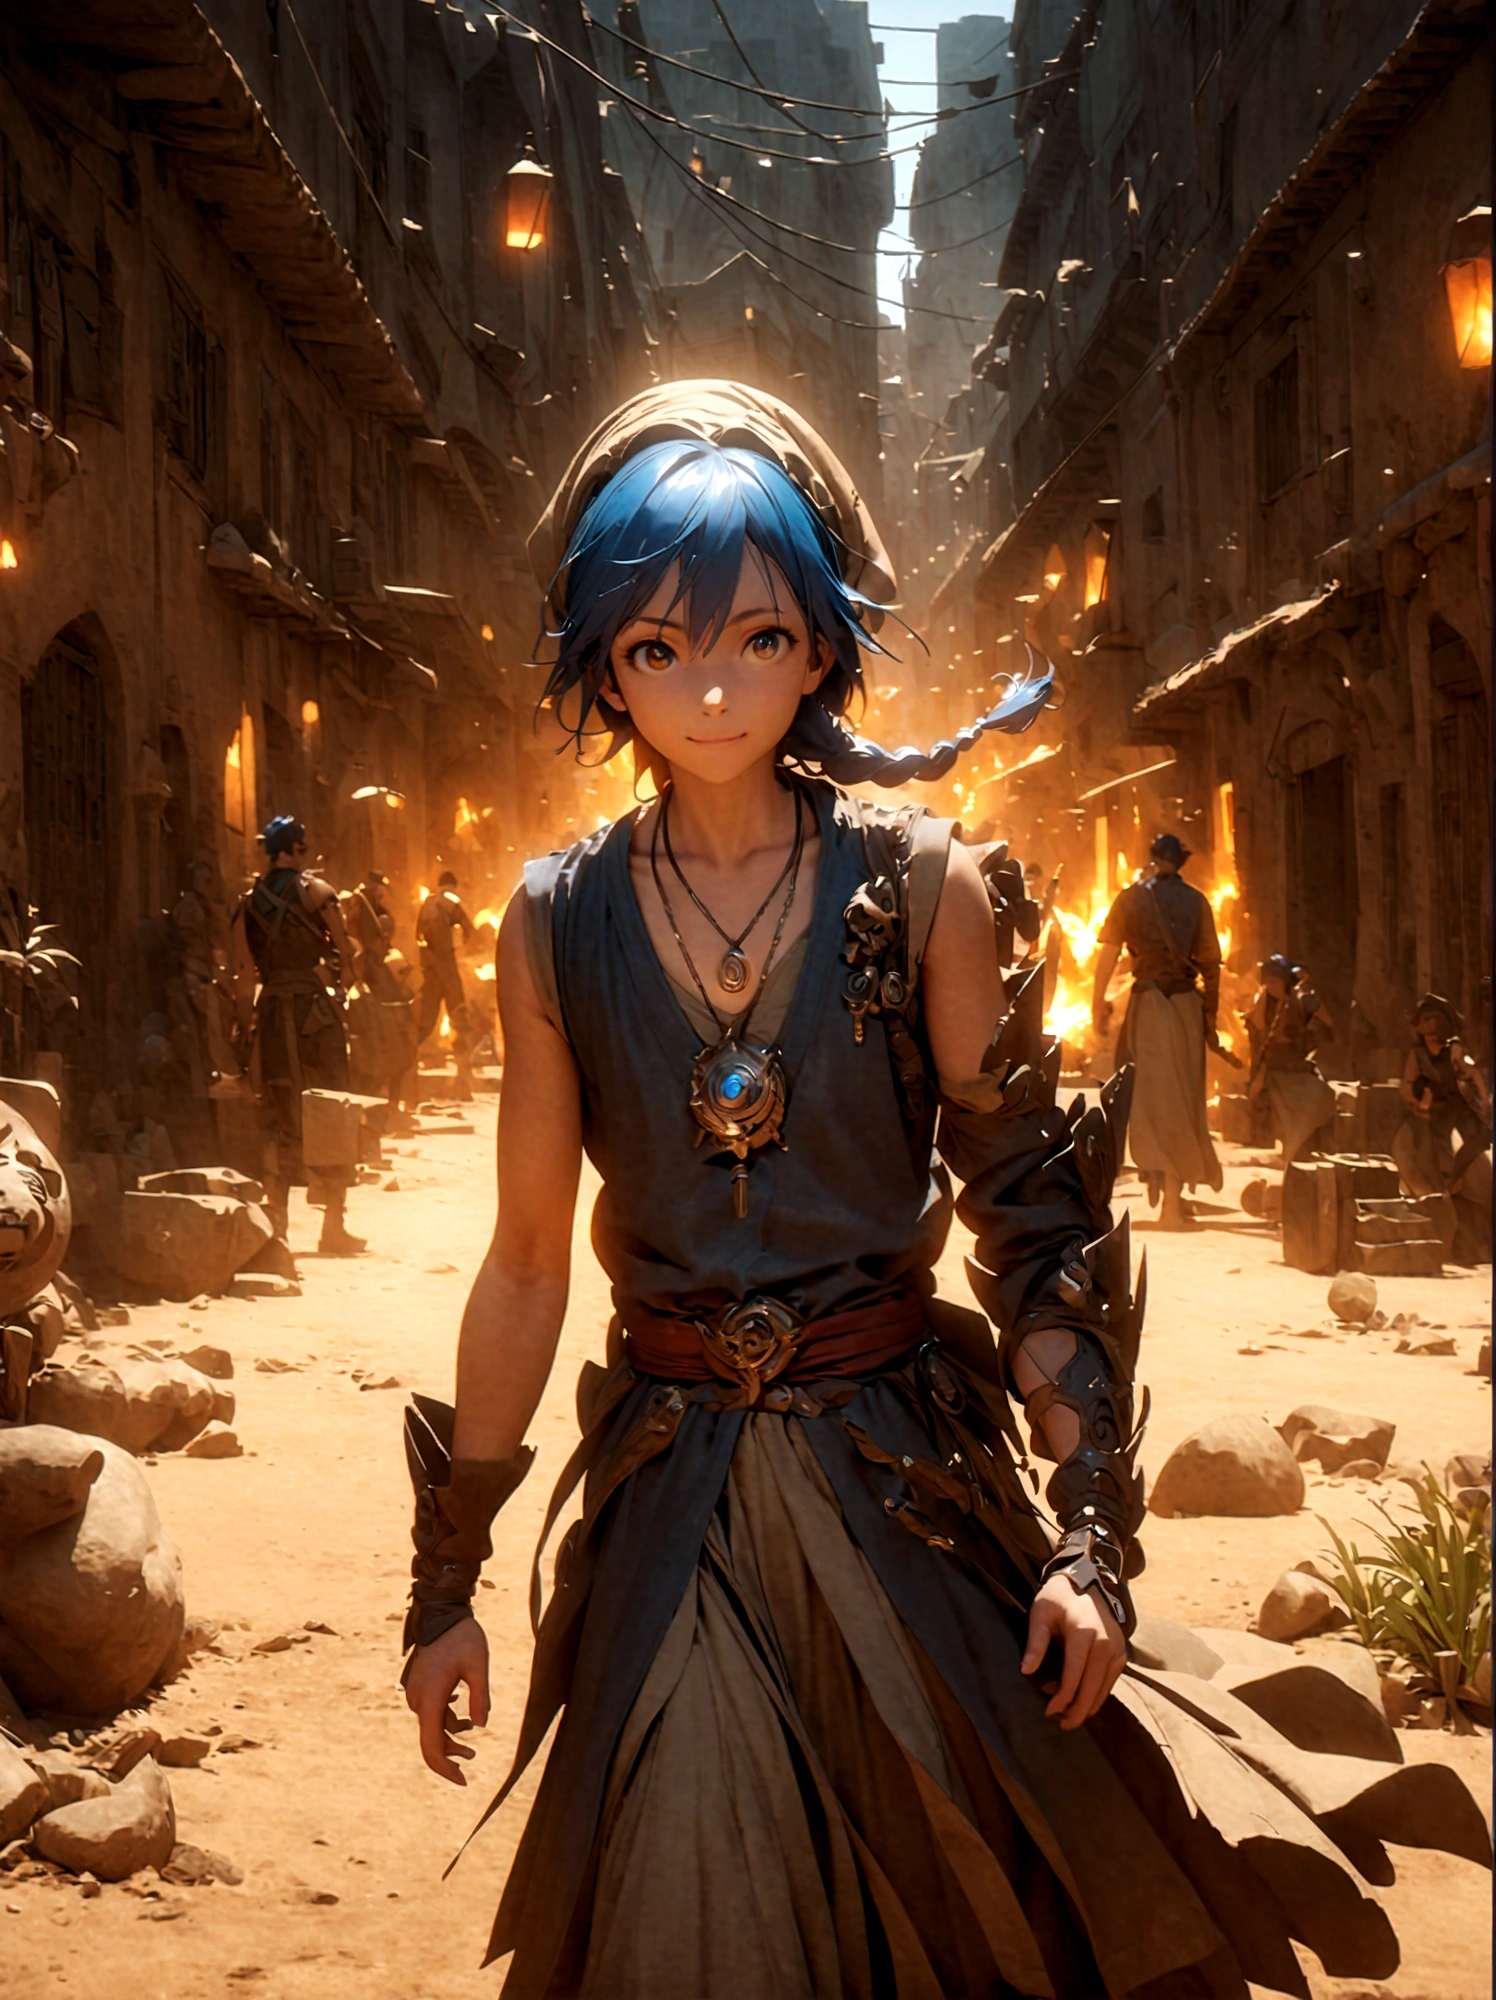 1boy，magi_aladdin，Standing alone in a desert town, He has short blue hair，With a braid，Wear a headscarf，Smiling，A flute pendant hangs around her neck，Wearing a blue vest, A magical explosion can be seen in the background，Super large magic circle，lightning，fighting，Mouth tightly shut，sneer，Soft lighting and detailed environments create an immersive environment，Let your imagination run wild with super details, Ultra-detailed face, High-quality visual effects, Sharp focus, Octane Rendering, 8k, Ultra HD